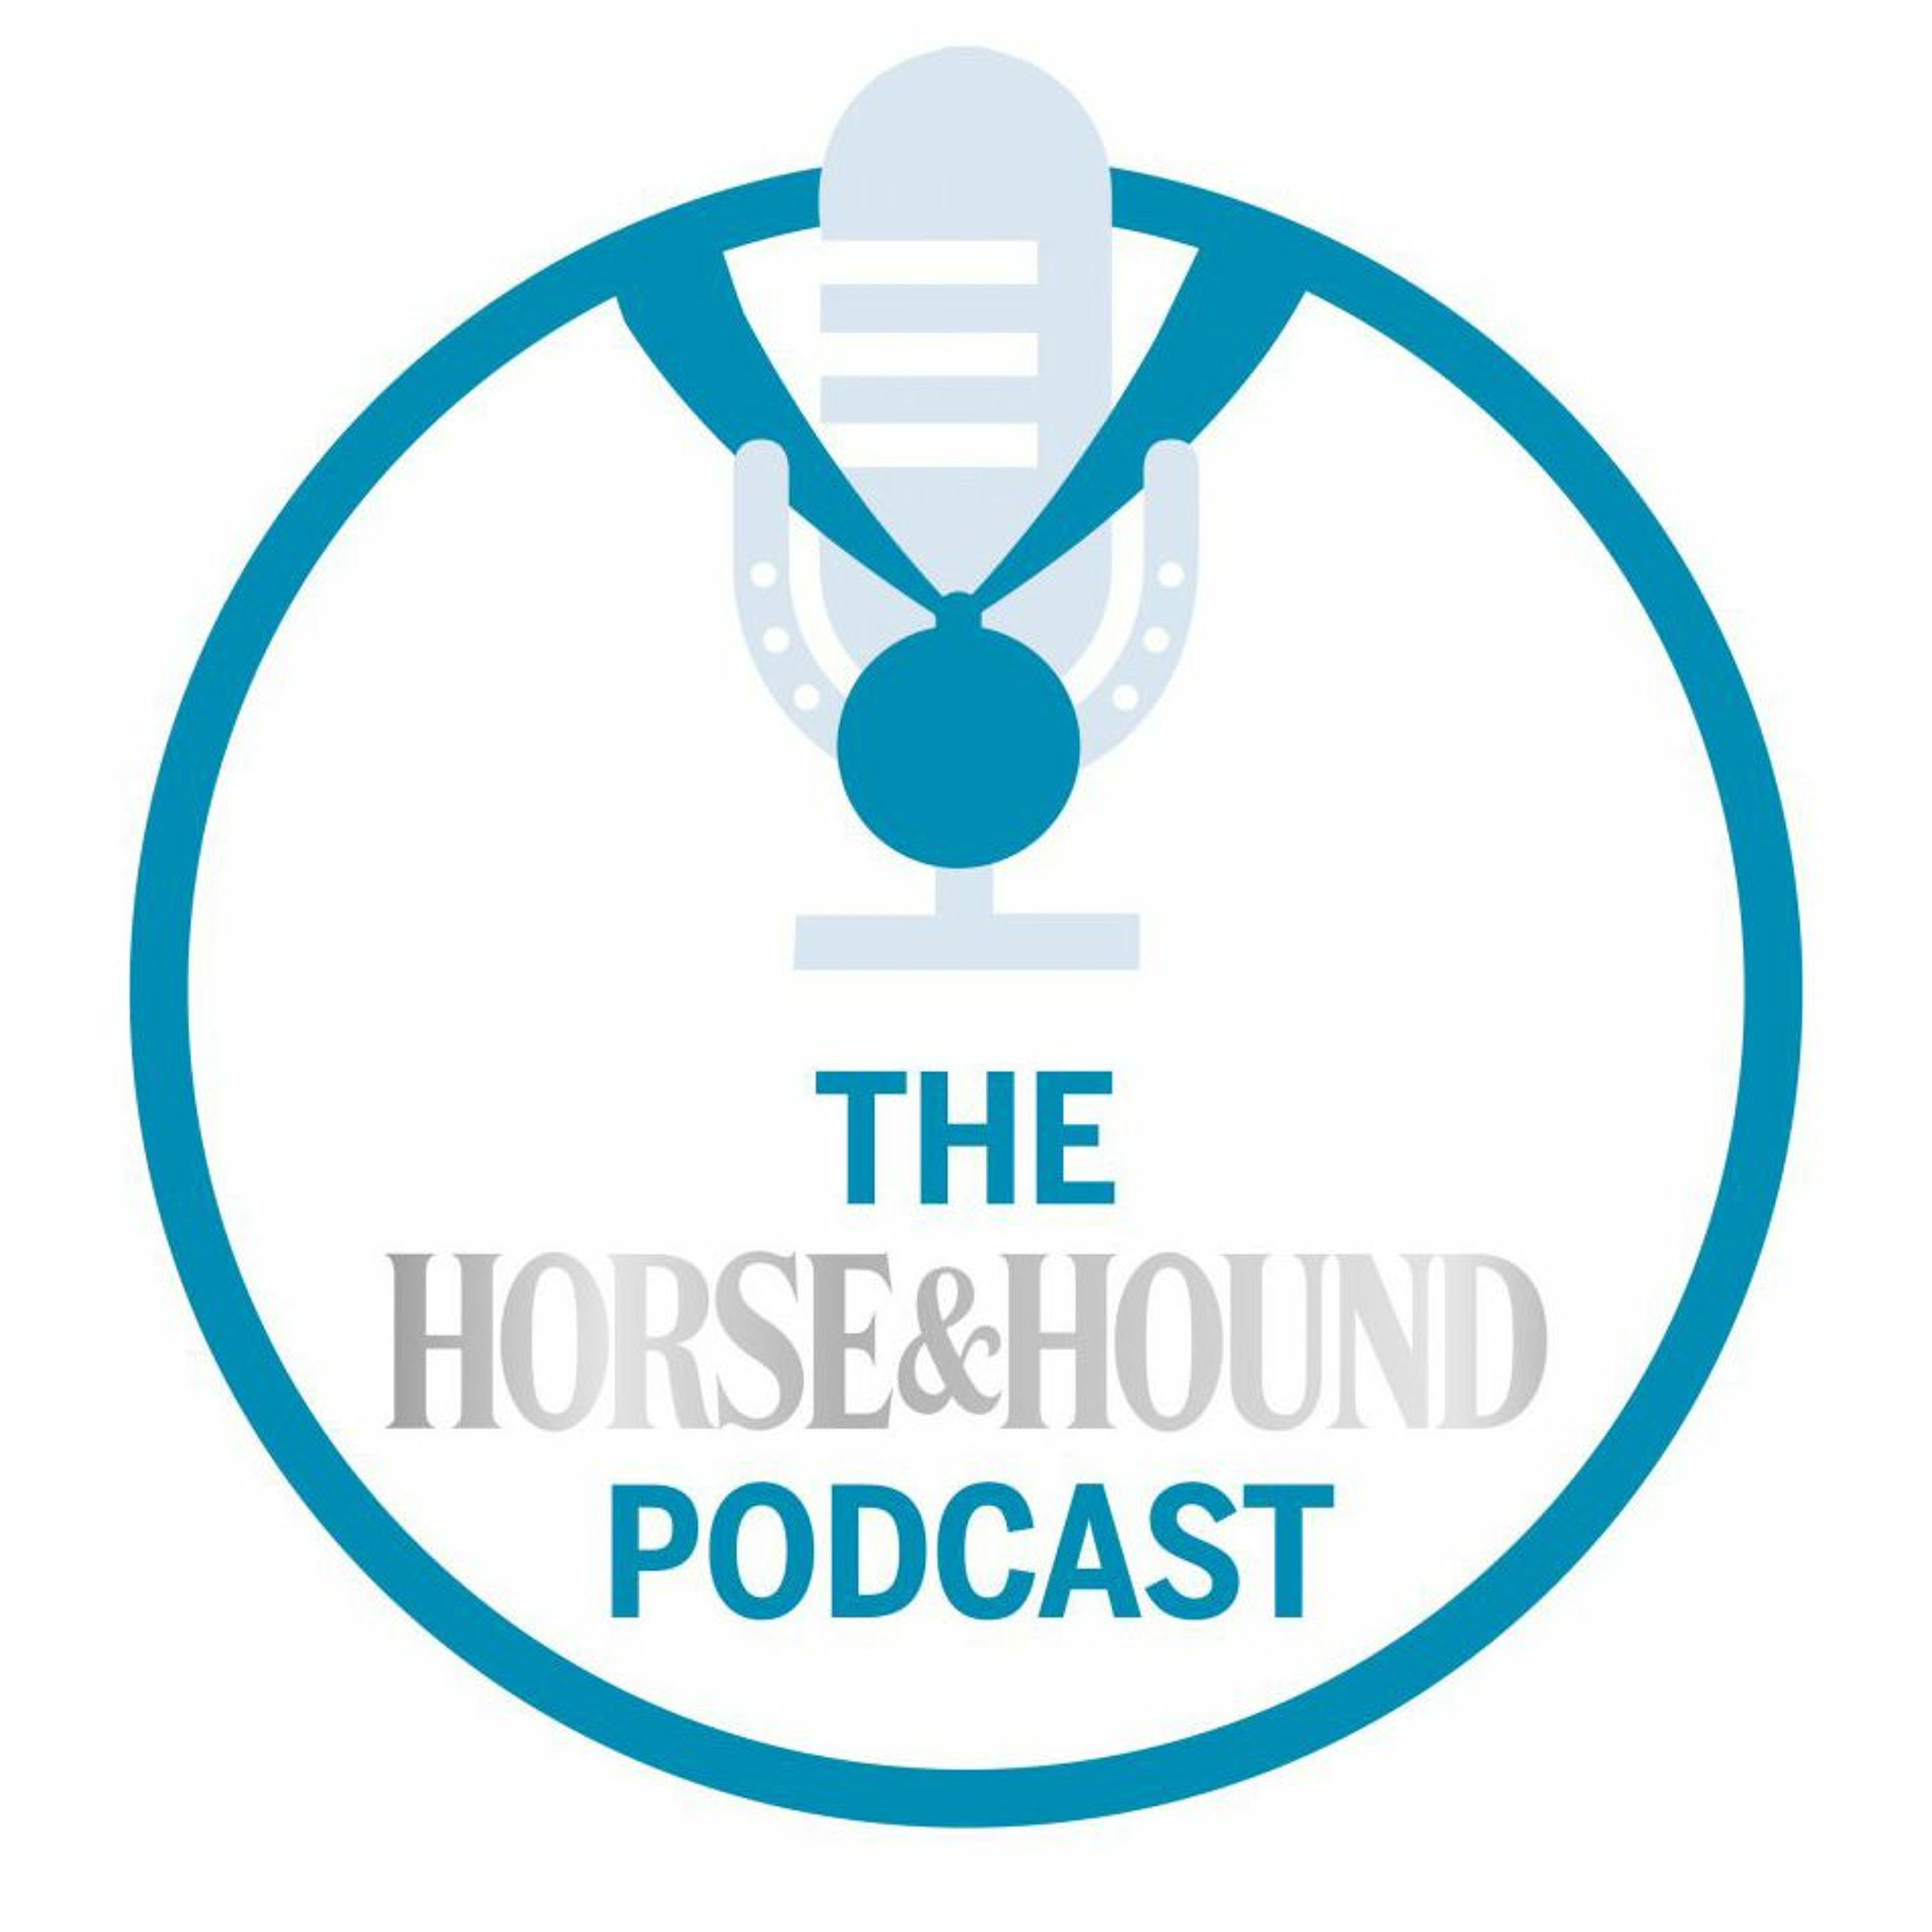 The Horse & Hound Podcast: Daily Tokyo Special – episode 11